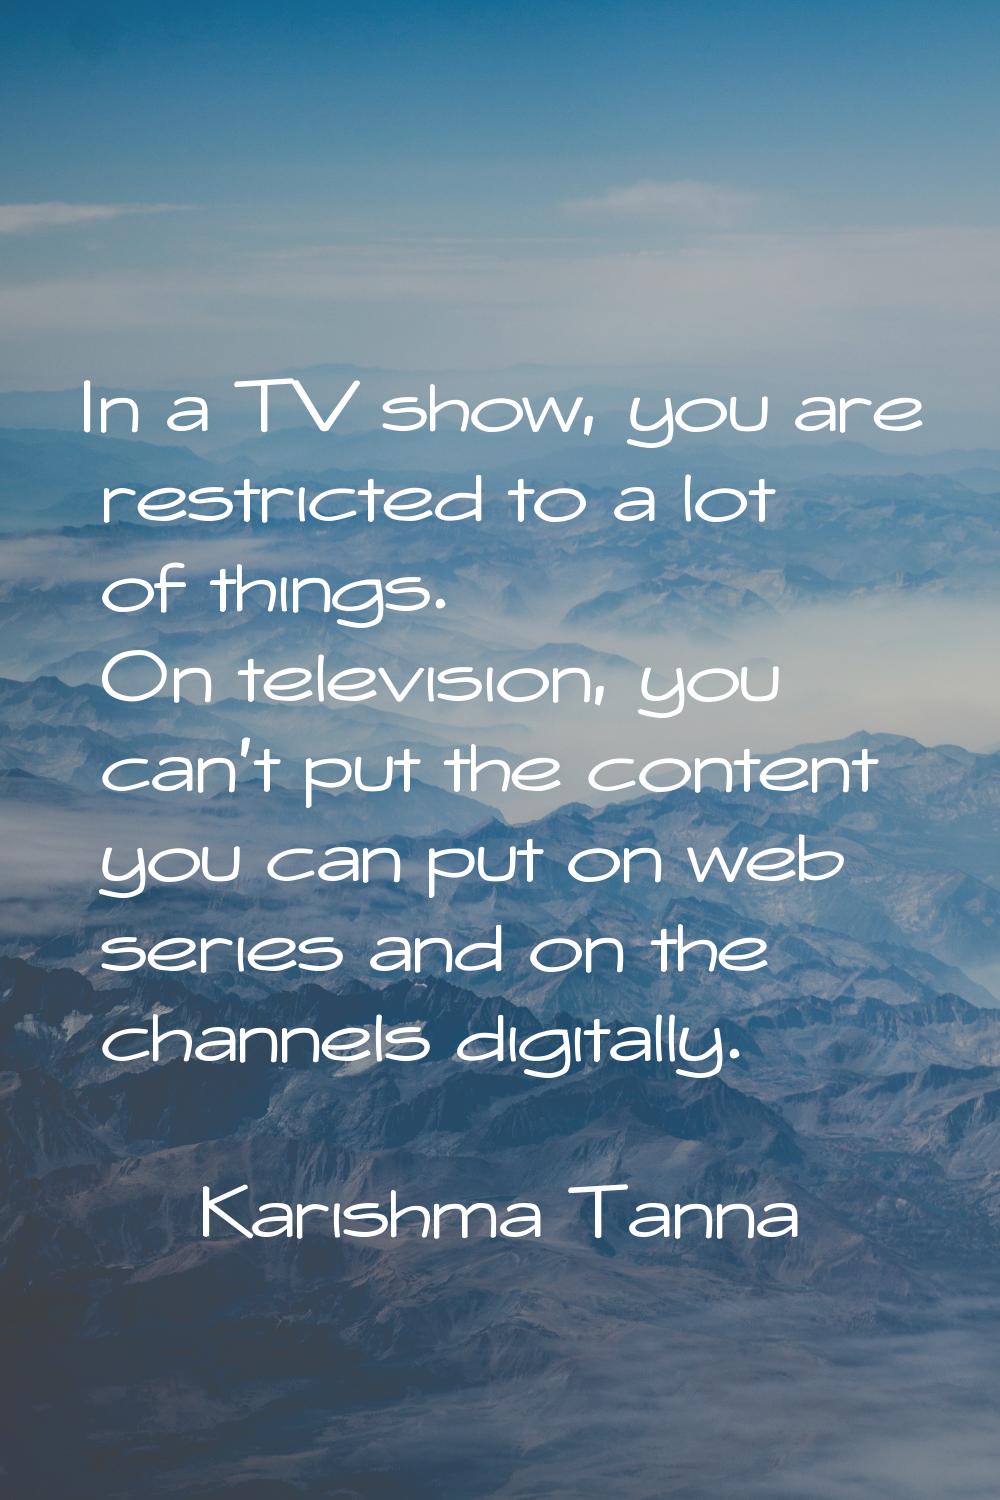 In a TV show, you are restricted to a lot of things. On television, you can't put the content you c